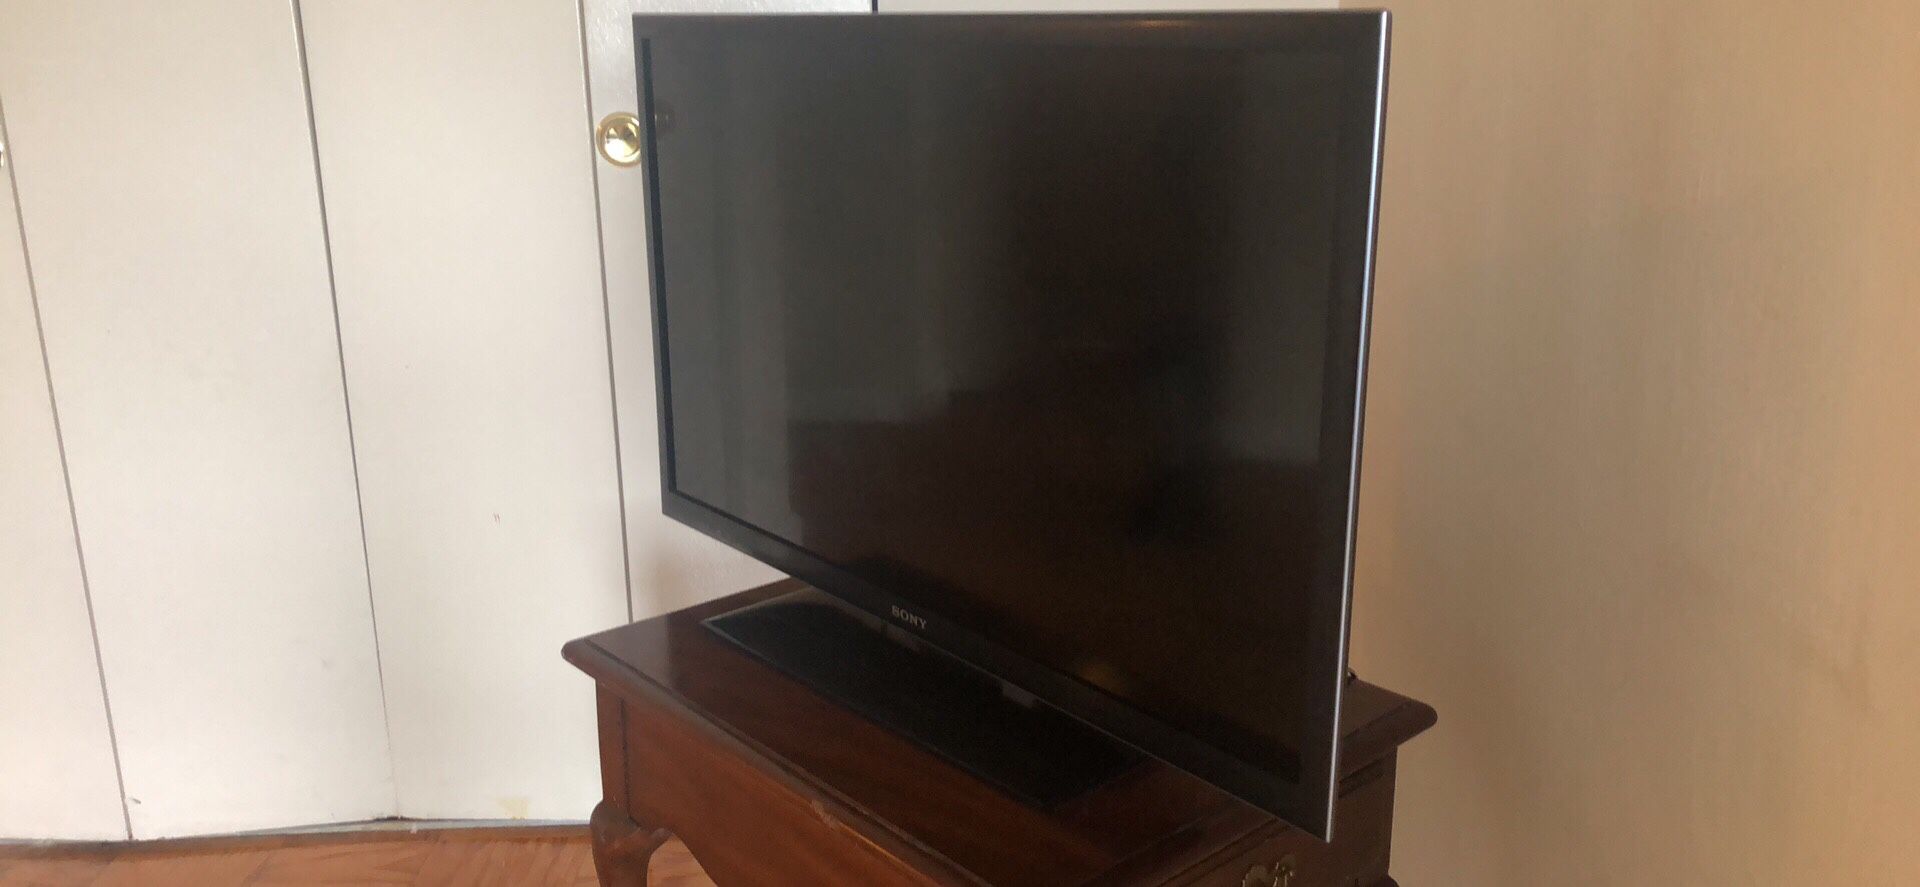 32 inch sony tv used like new and it works good desk is free with tv